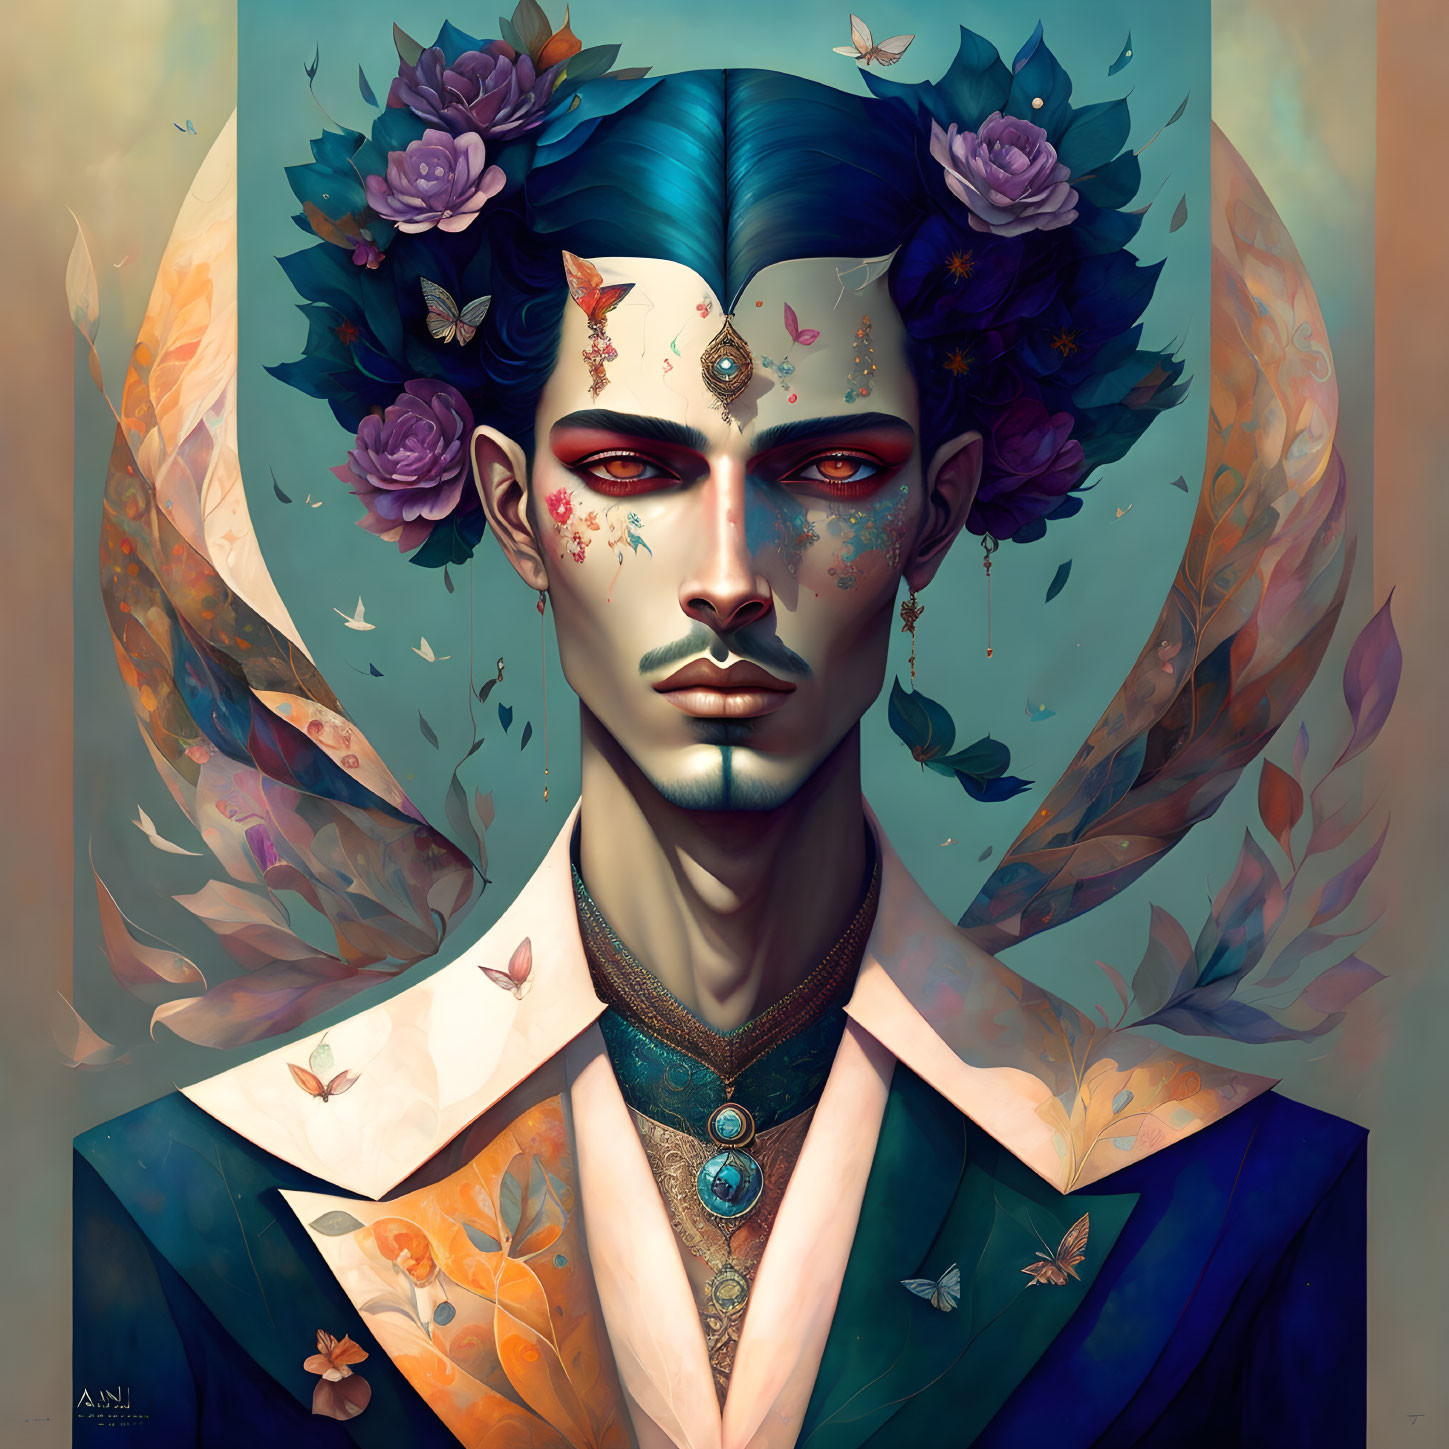 Stylized Male Figure with Blue Hair and Floral Adornments